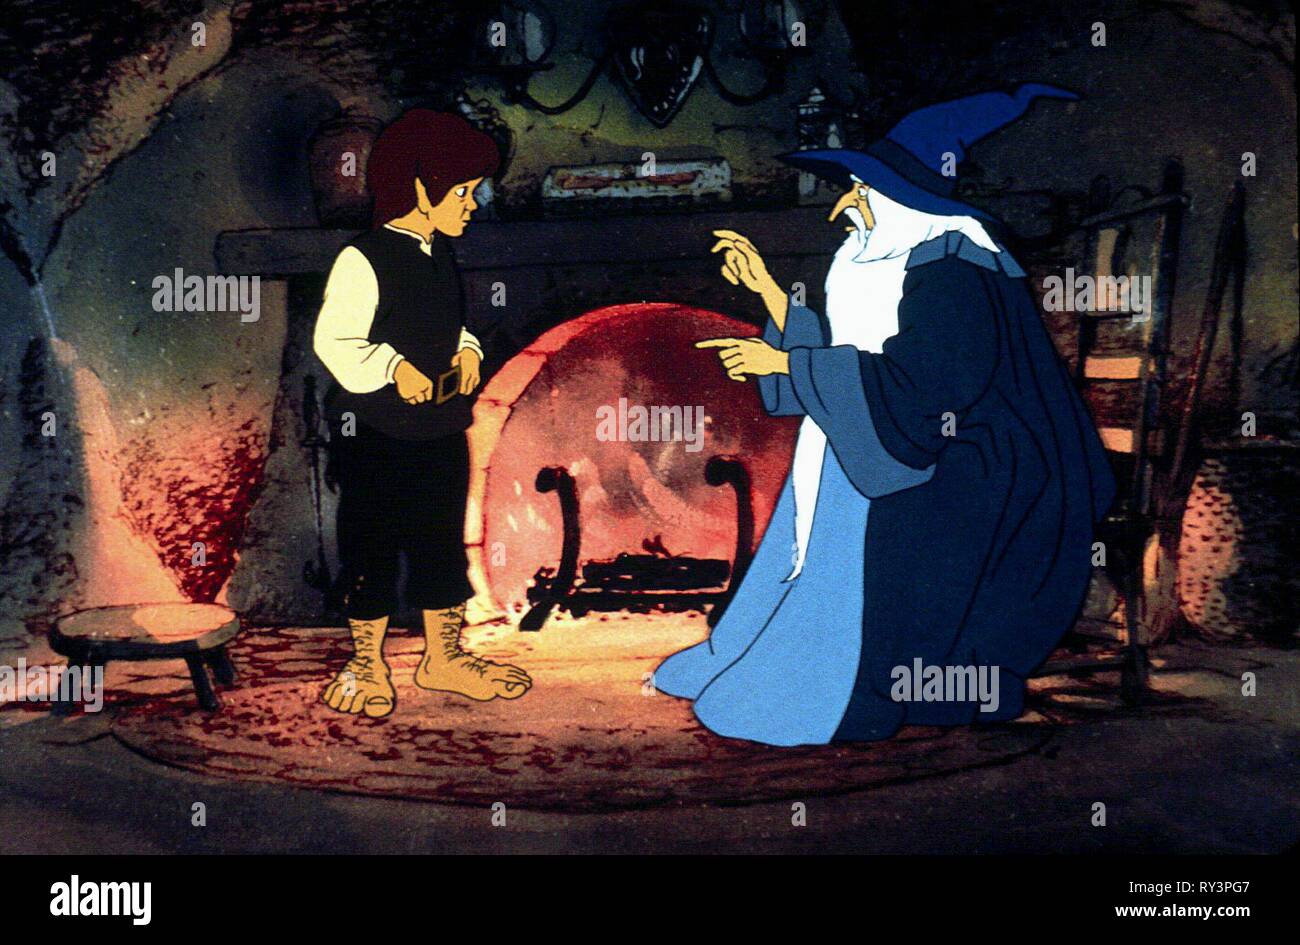 FRODO,GANDALF, THE LORD OF THE RINGS, 1978 Stock Photo